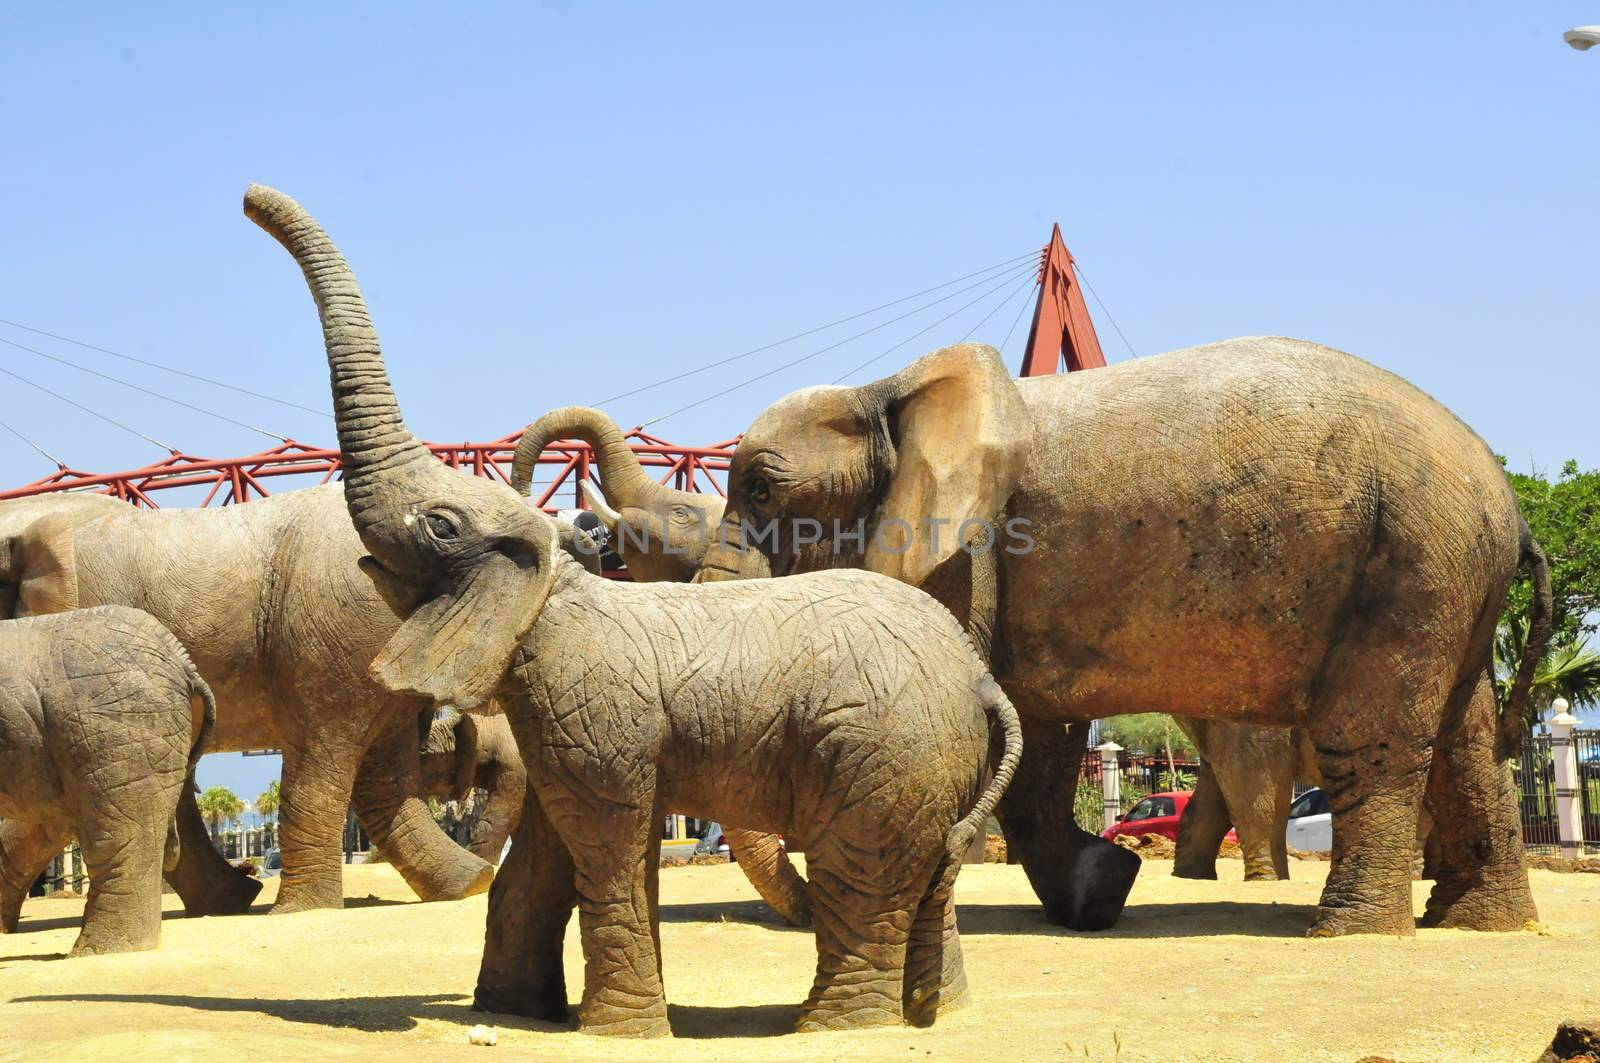 Sculptures of elephants on a roundabout